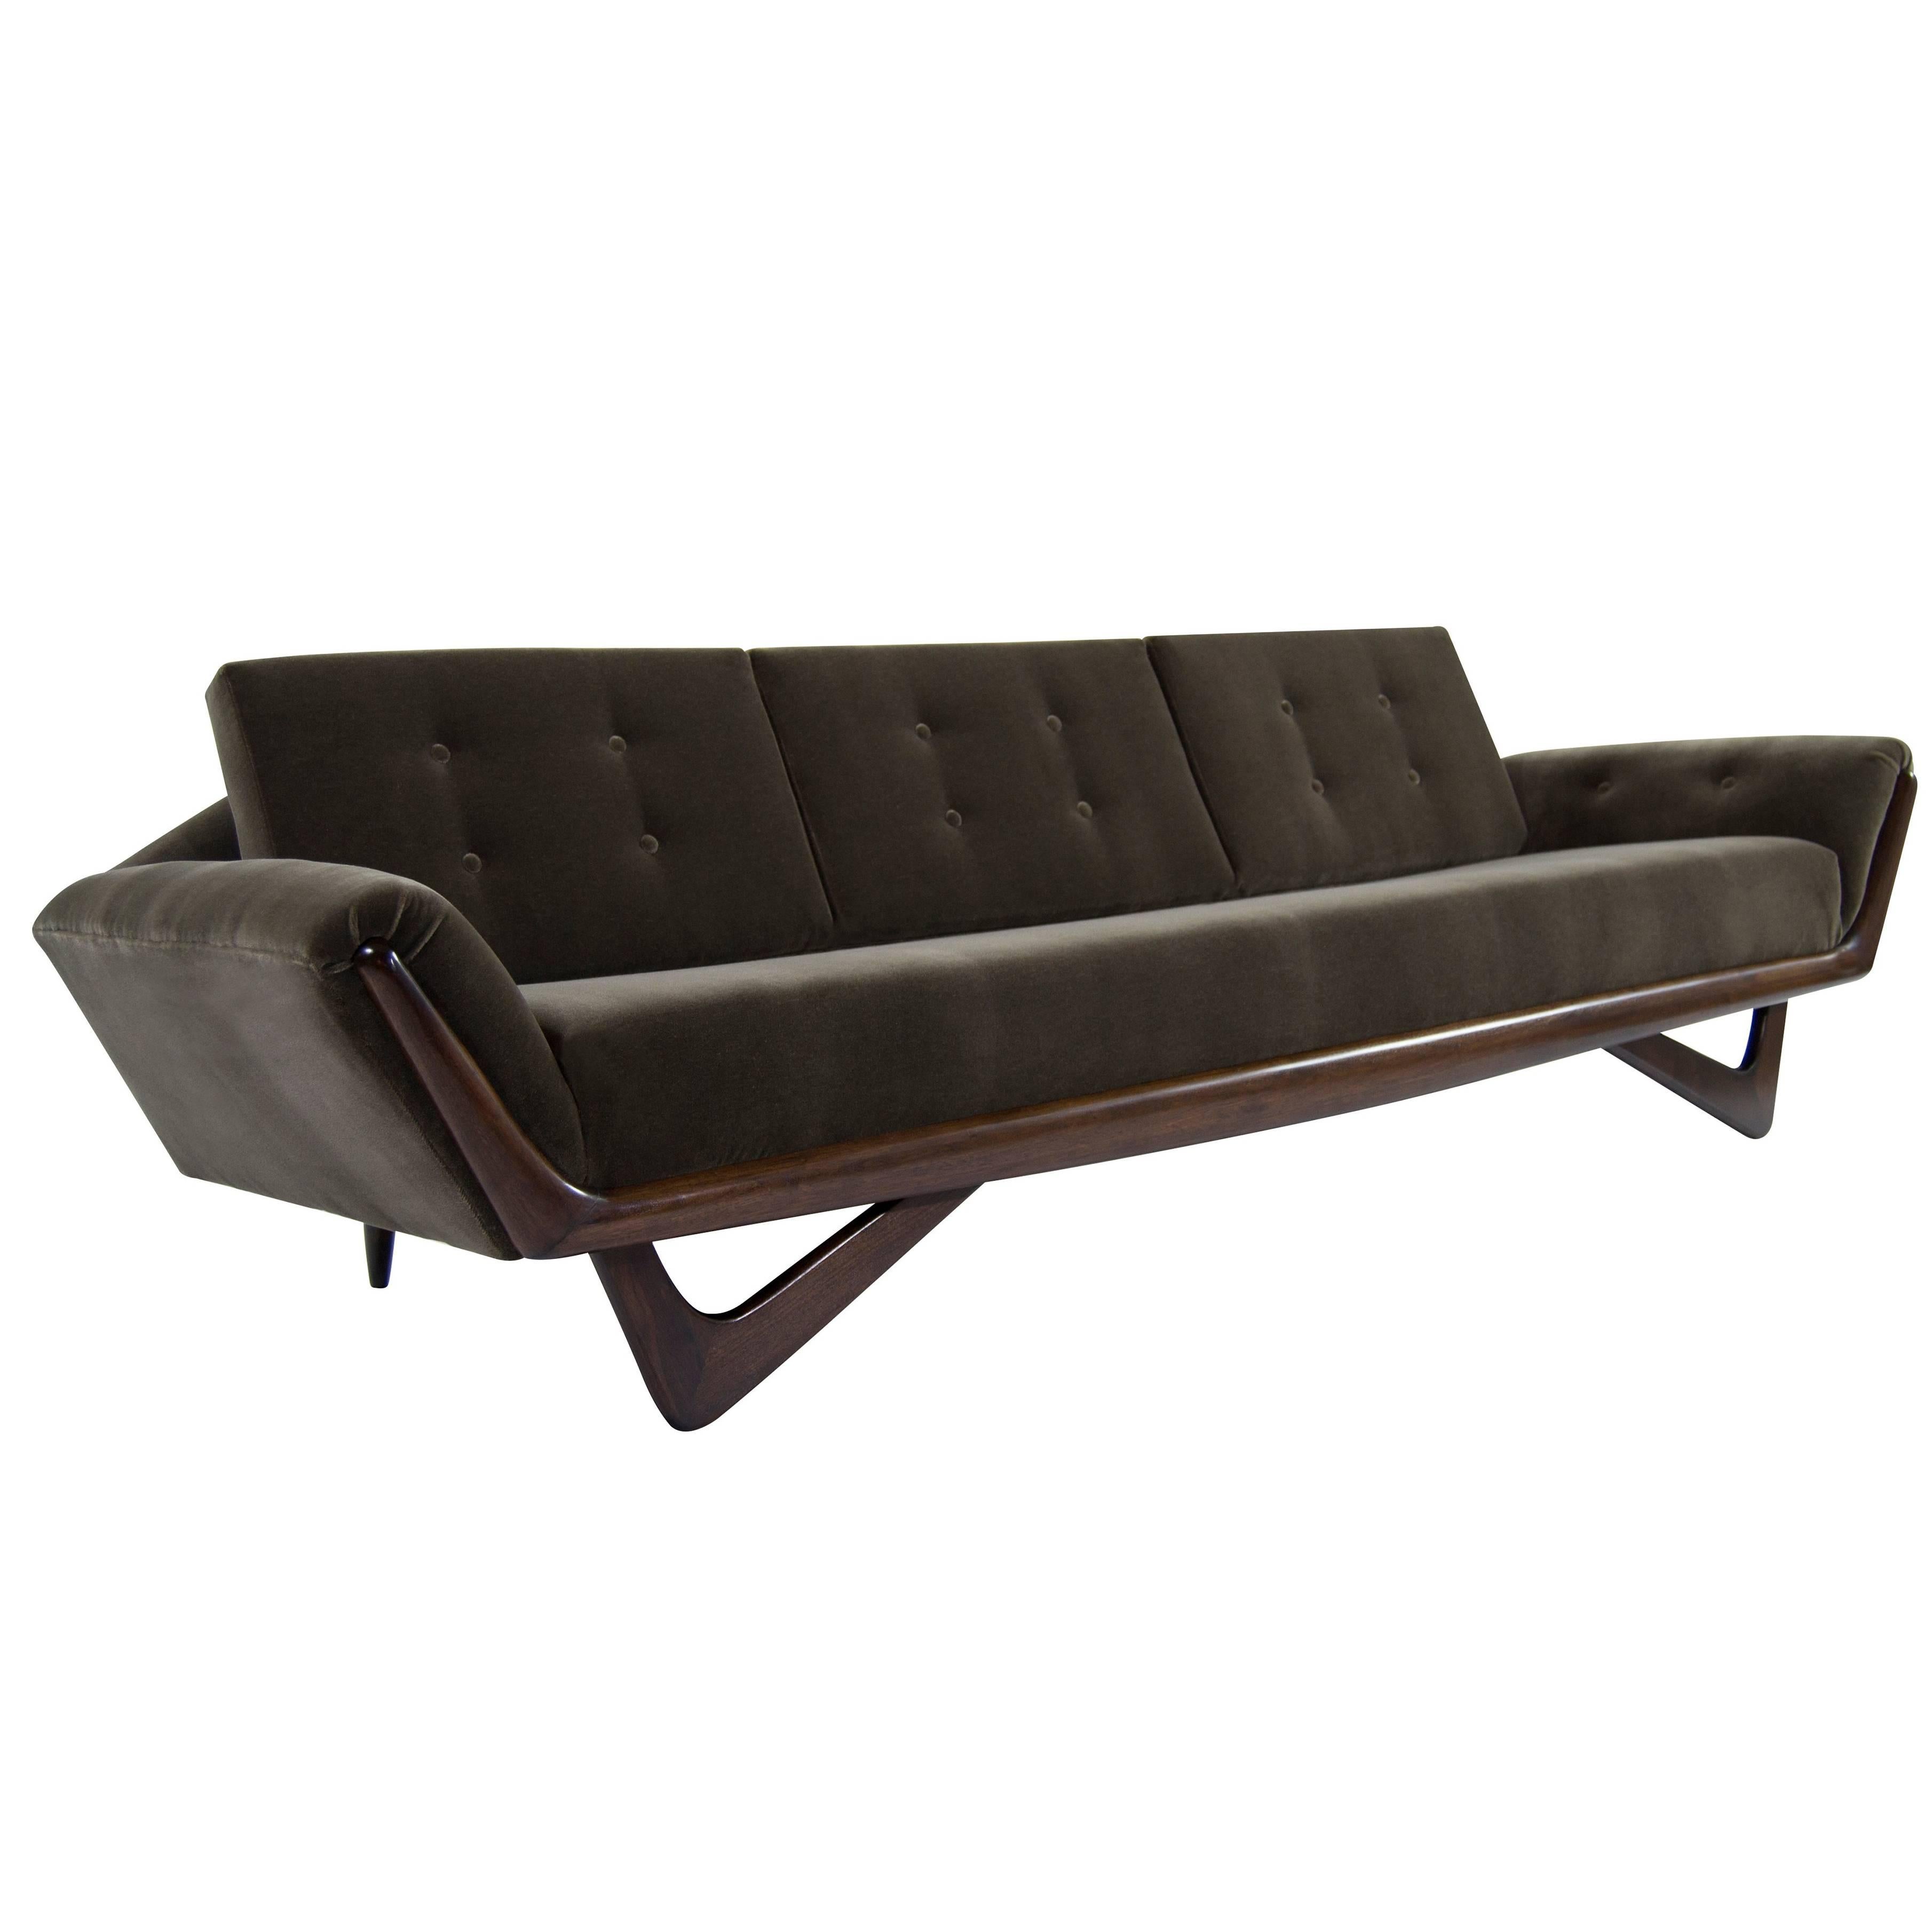 Gondola sofa designed by Adrian Pearsall for Craft Associates, circa 1960s. 

Newly upholstered in brown mohair, sculptural walnut legs and trim fully restored.